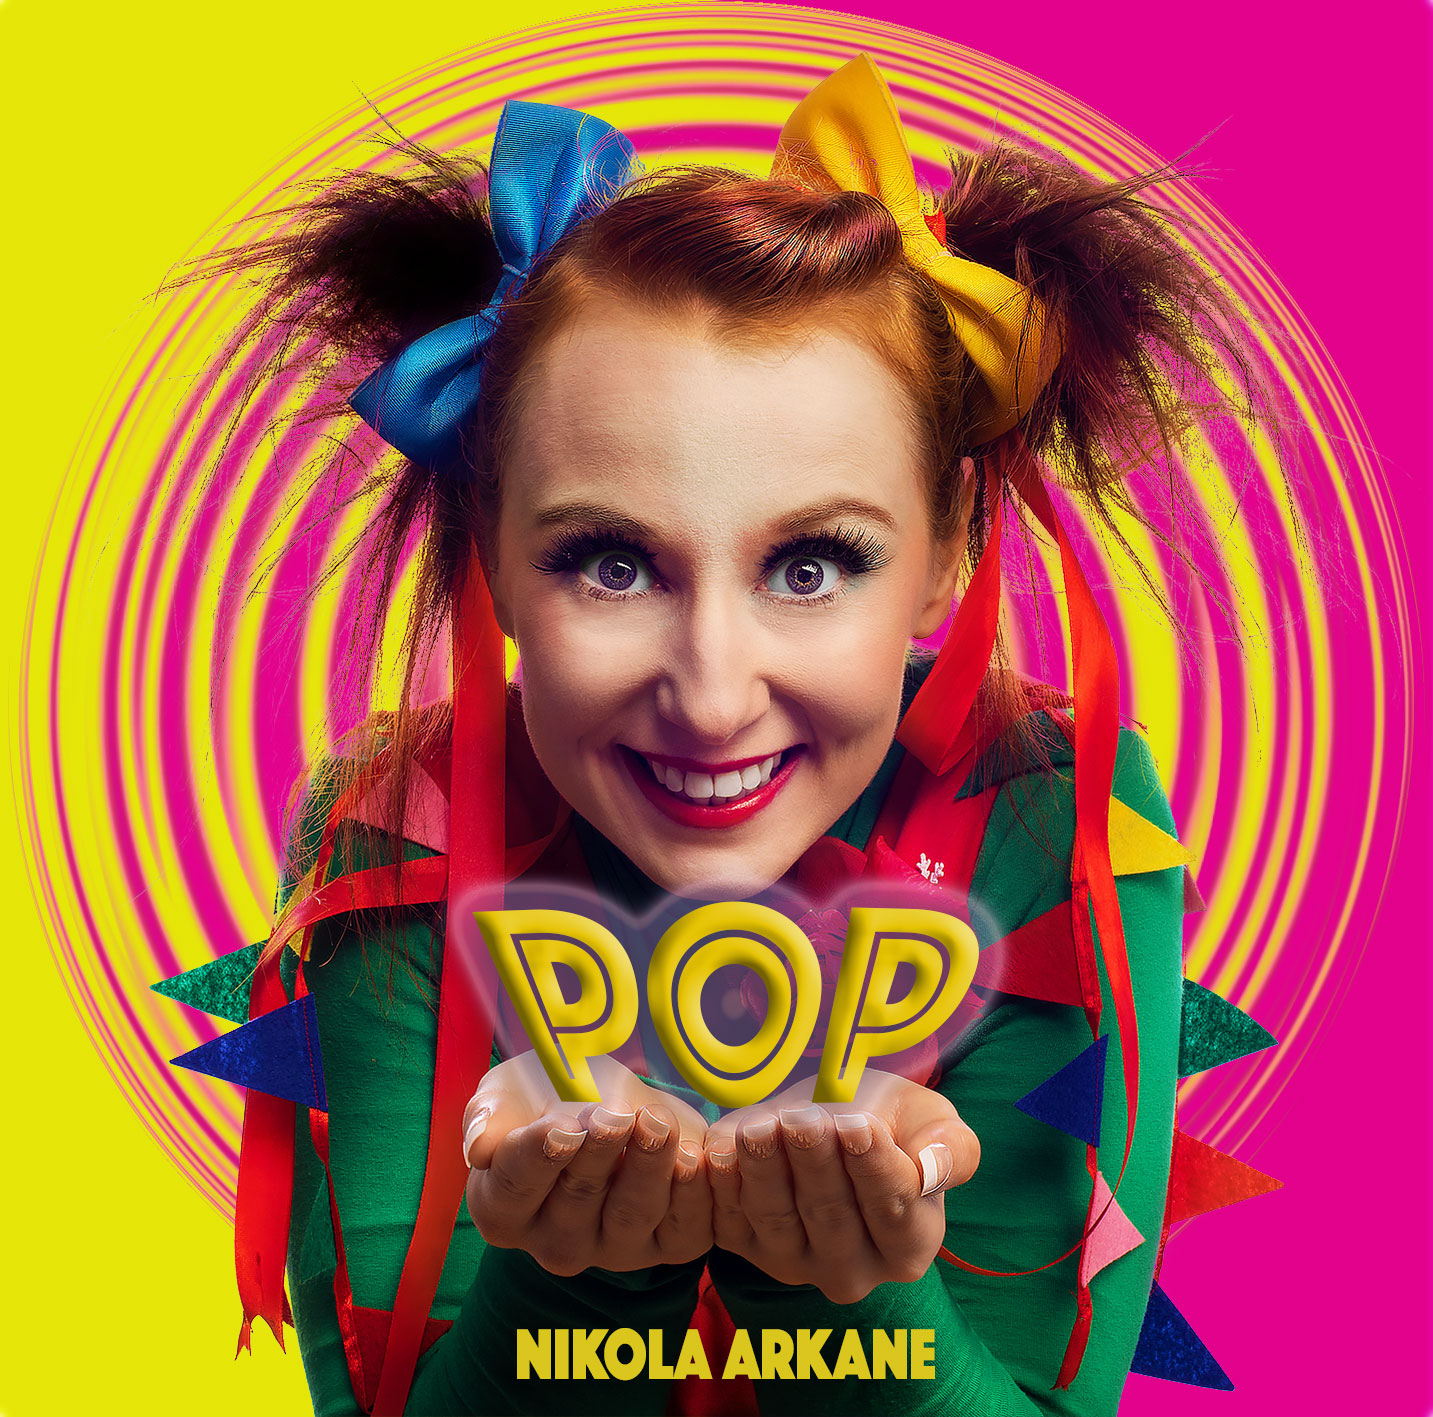 Nikola Arkane on the cover of her book as the character FizzWizzPop